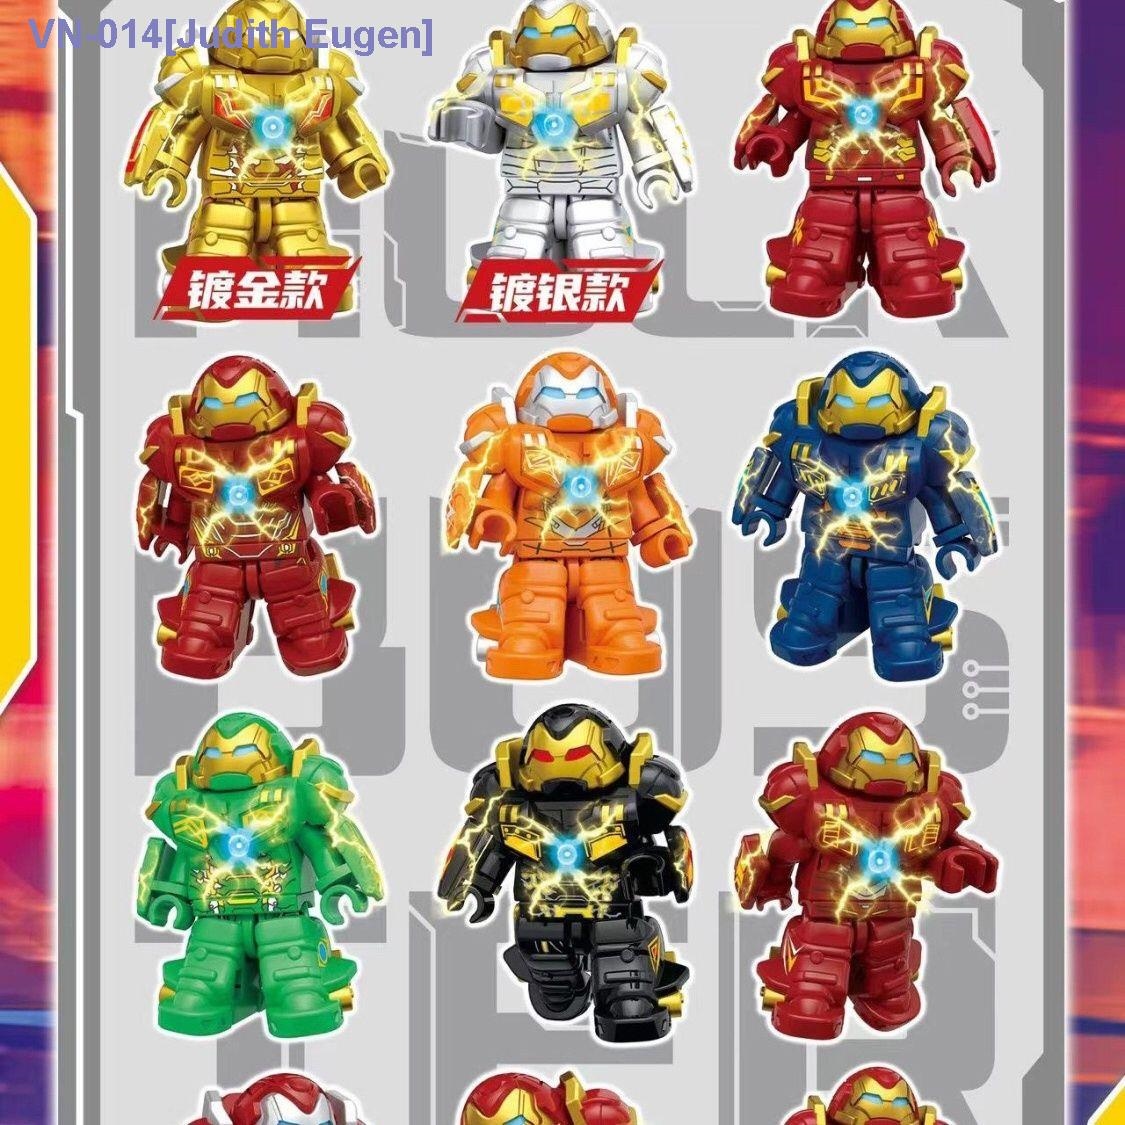 No The new model is compatible with LEGO Iron Man Hulkbuster armor